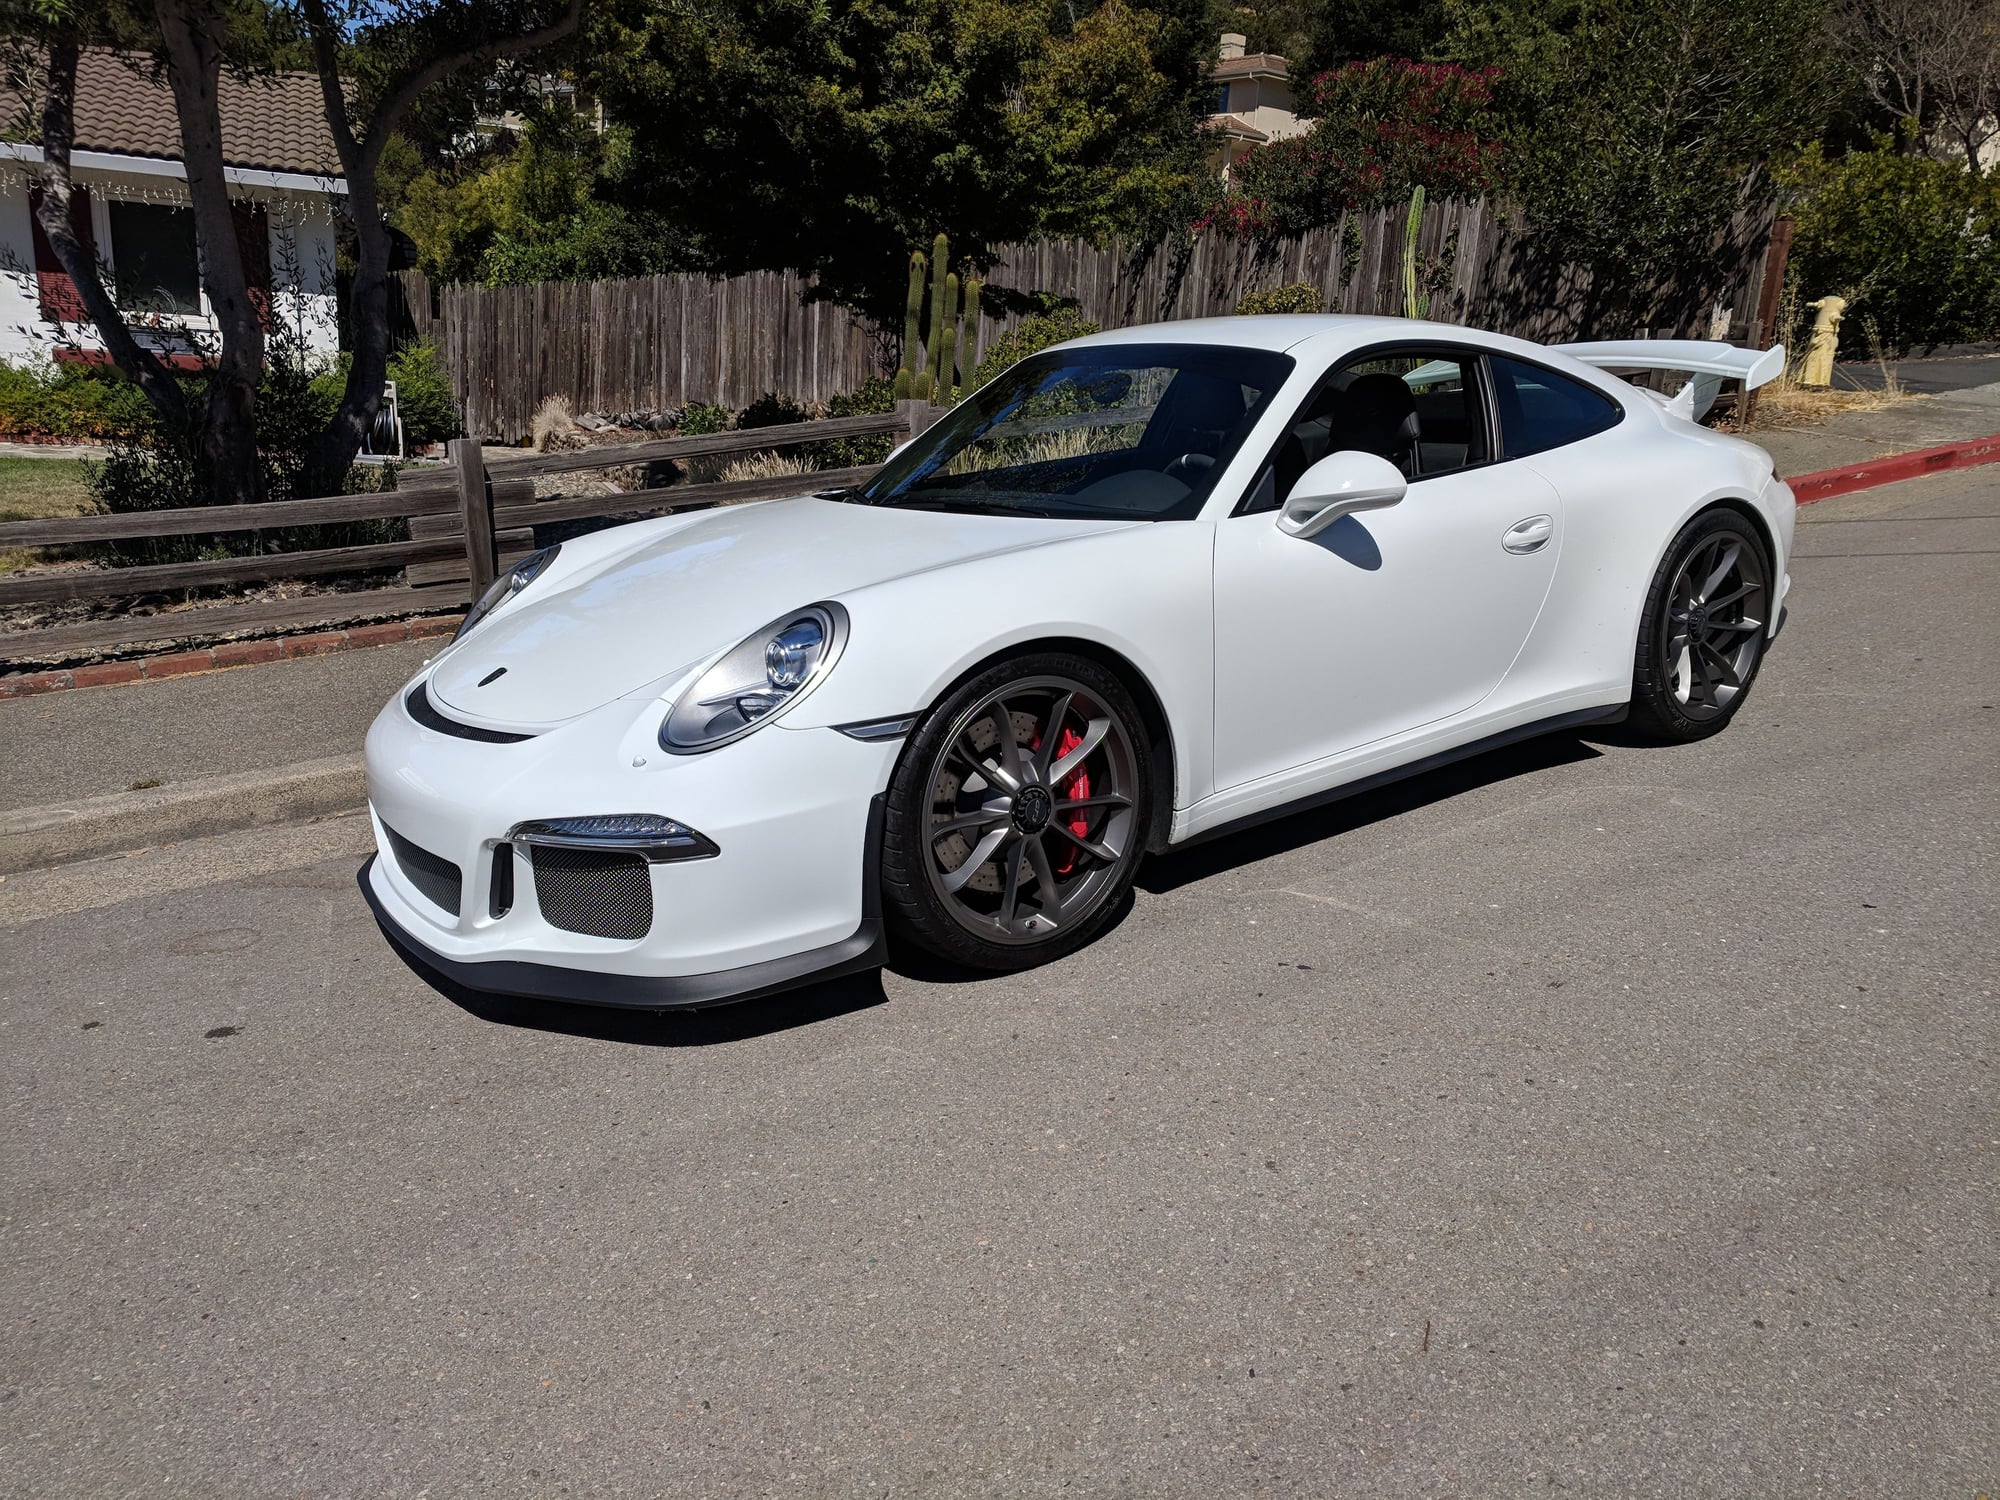 Wheels and Tires/Axles - WTT: Silver 991 GT3 Wheels for Black Wheels - Used - 2013 to 2019 Porsche GT3 - San Francisco, CA 94107, United States